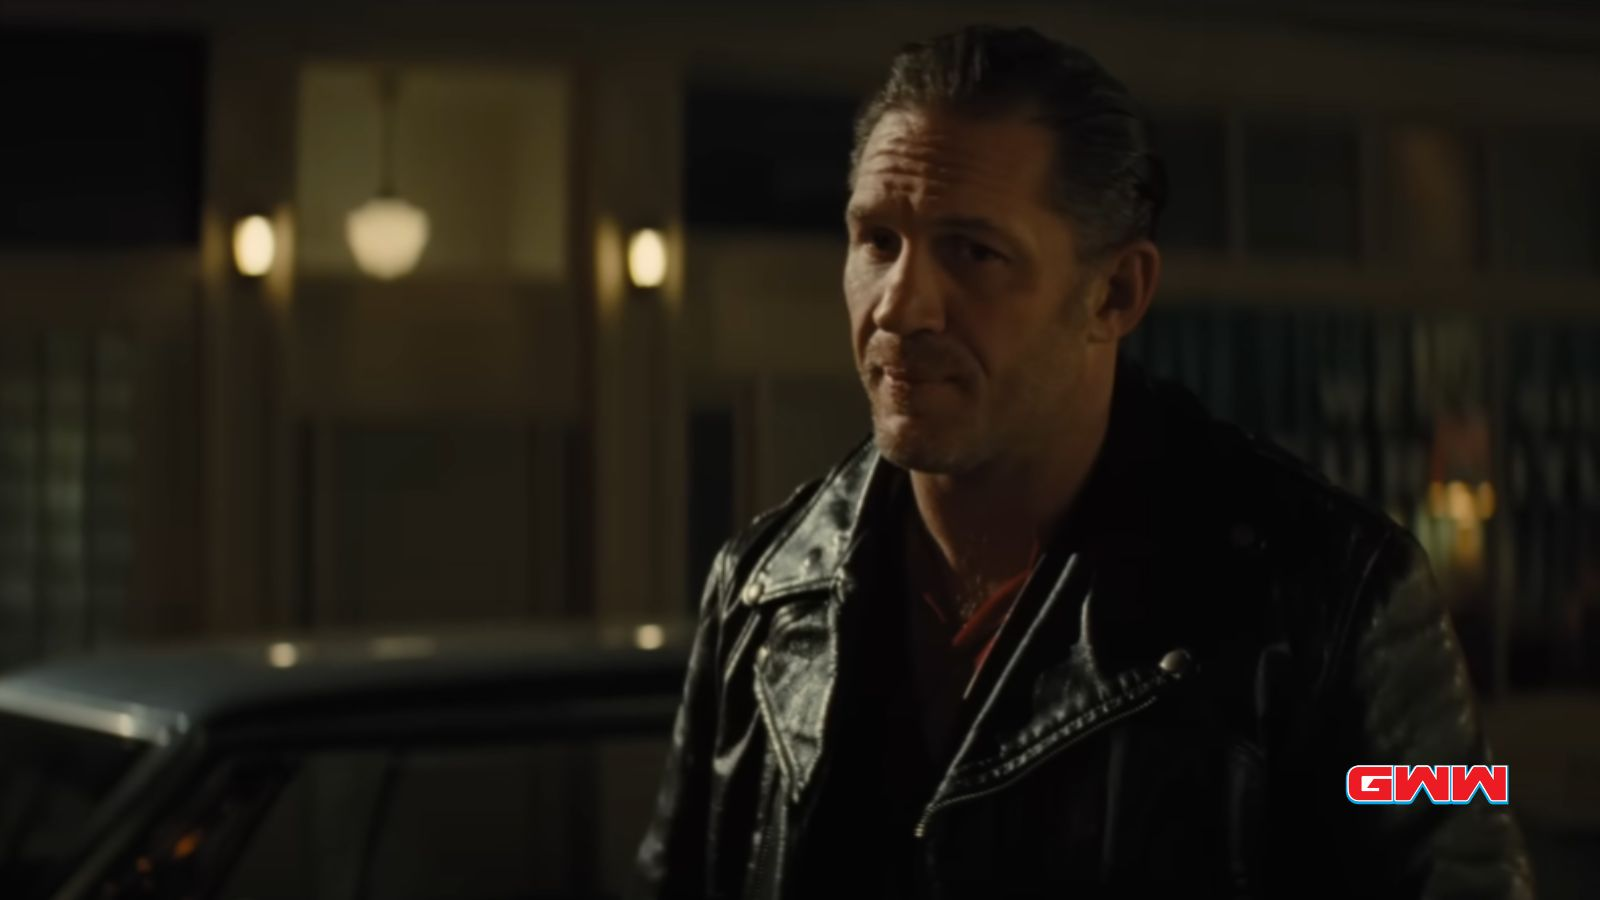 Johnny in a leather jacket speaking at night, standing near a car.